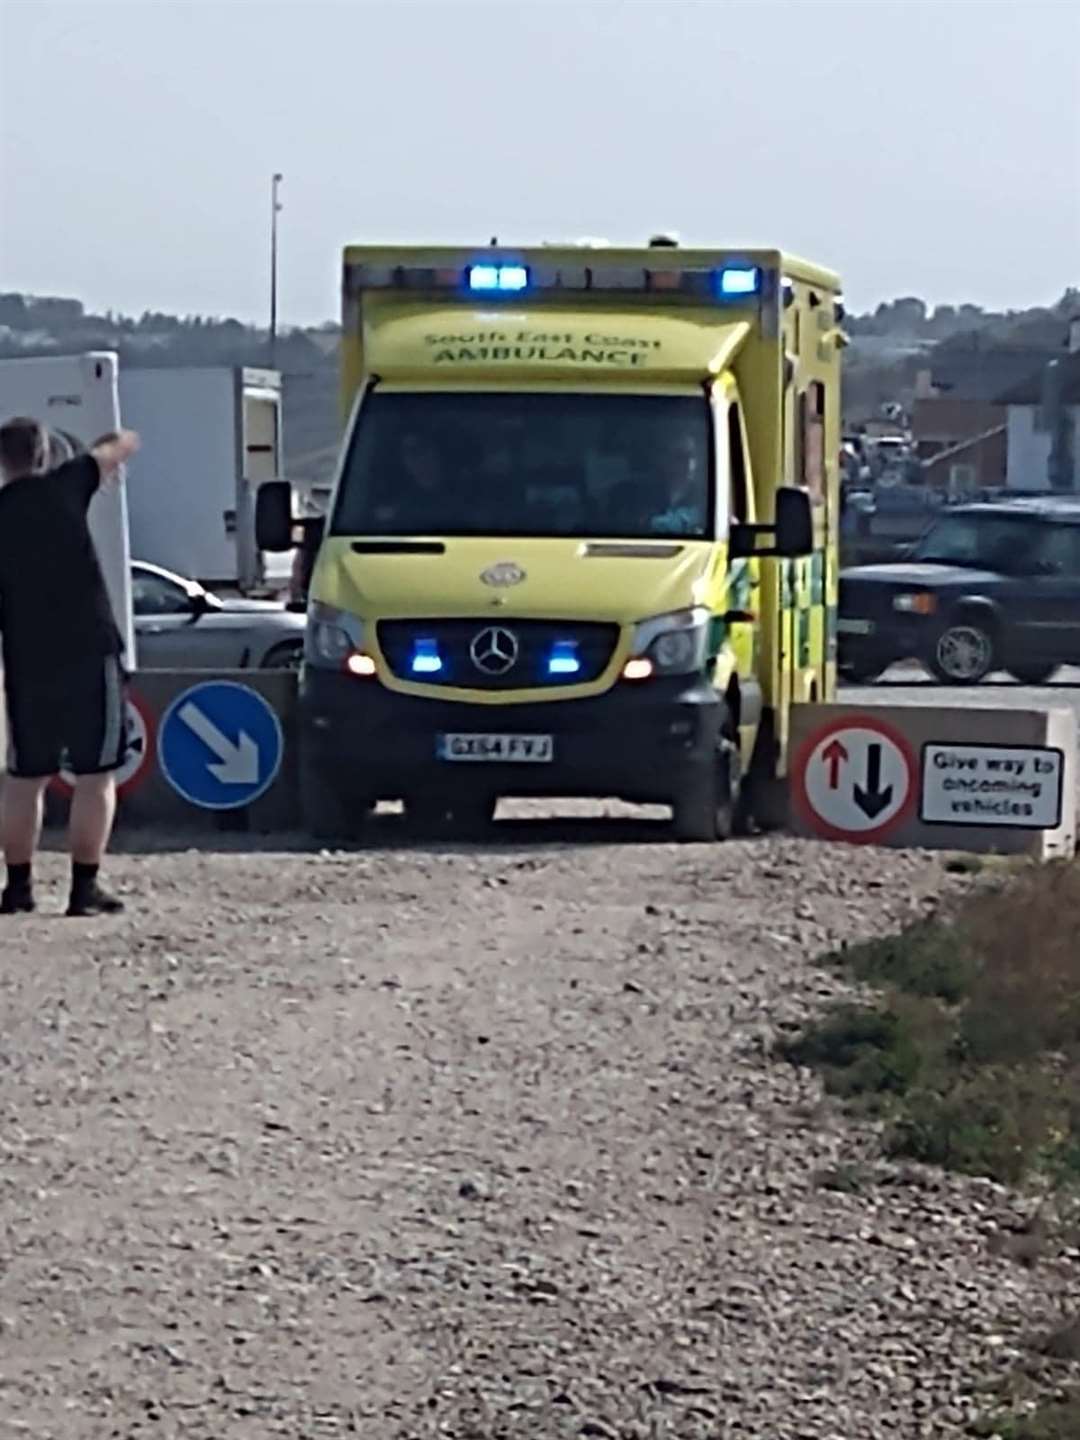 An ambulance trying to squeeze through Swale council's concrete bollards on the shingle bank at Minster, Sheppey, during Sunday's emergency when a kite-surfer was seriously injured. Paramedics don't have keys to the emergency barrier at the other end of the beach. Picture: Gary Inge